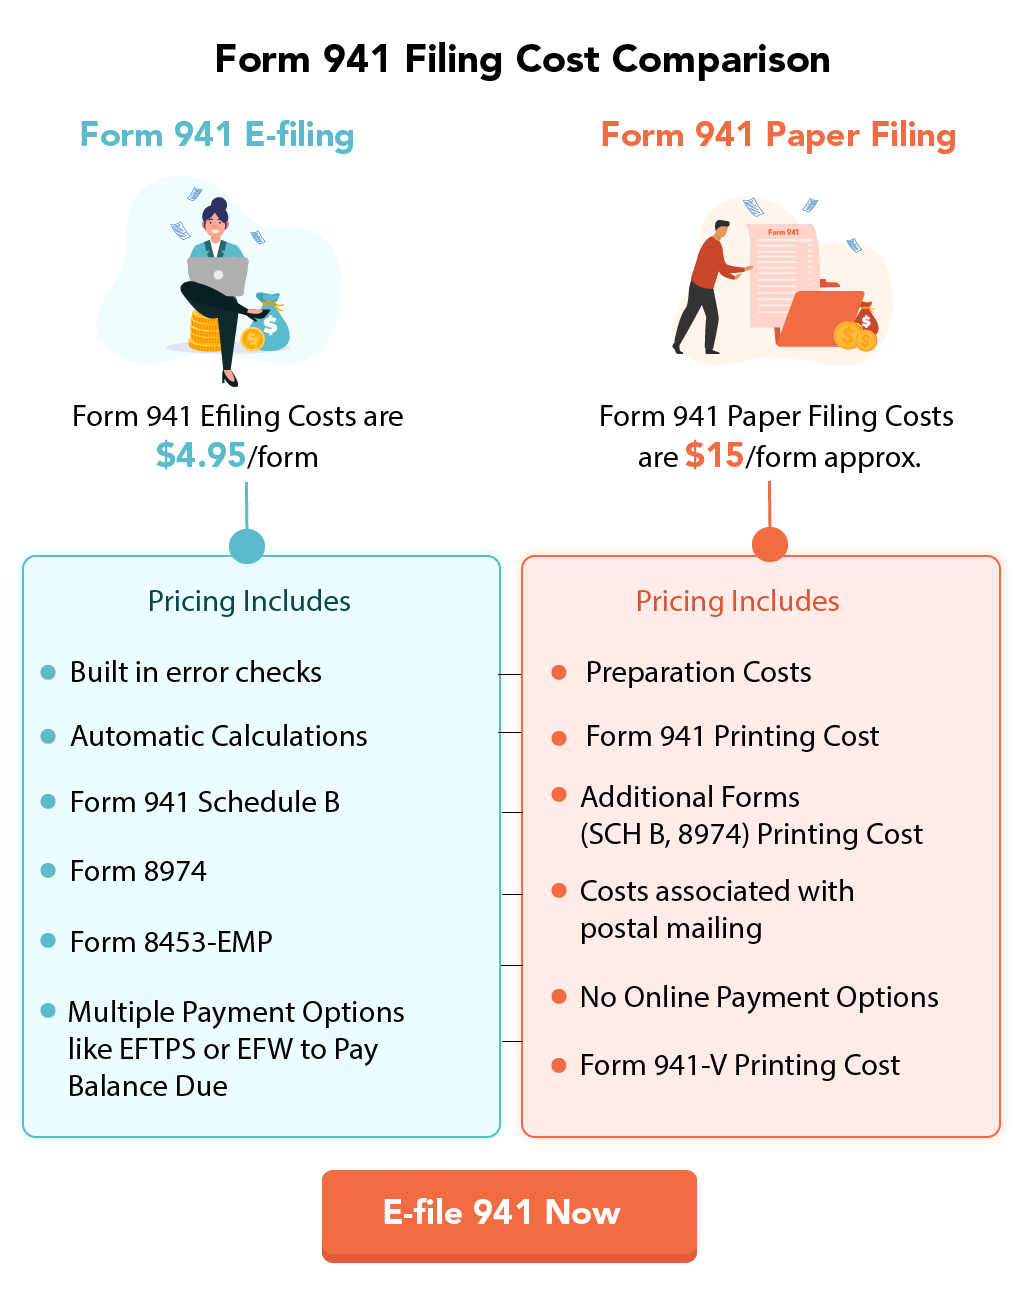 Click here to see Form 941 Filing cost comparison